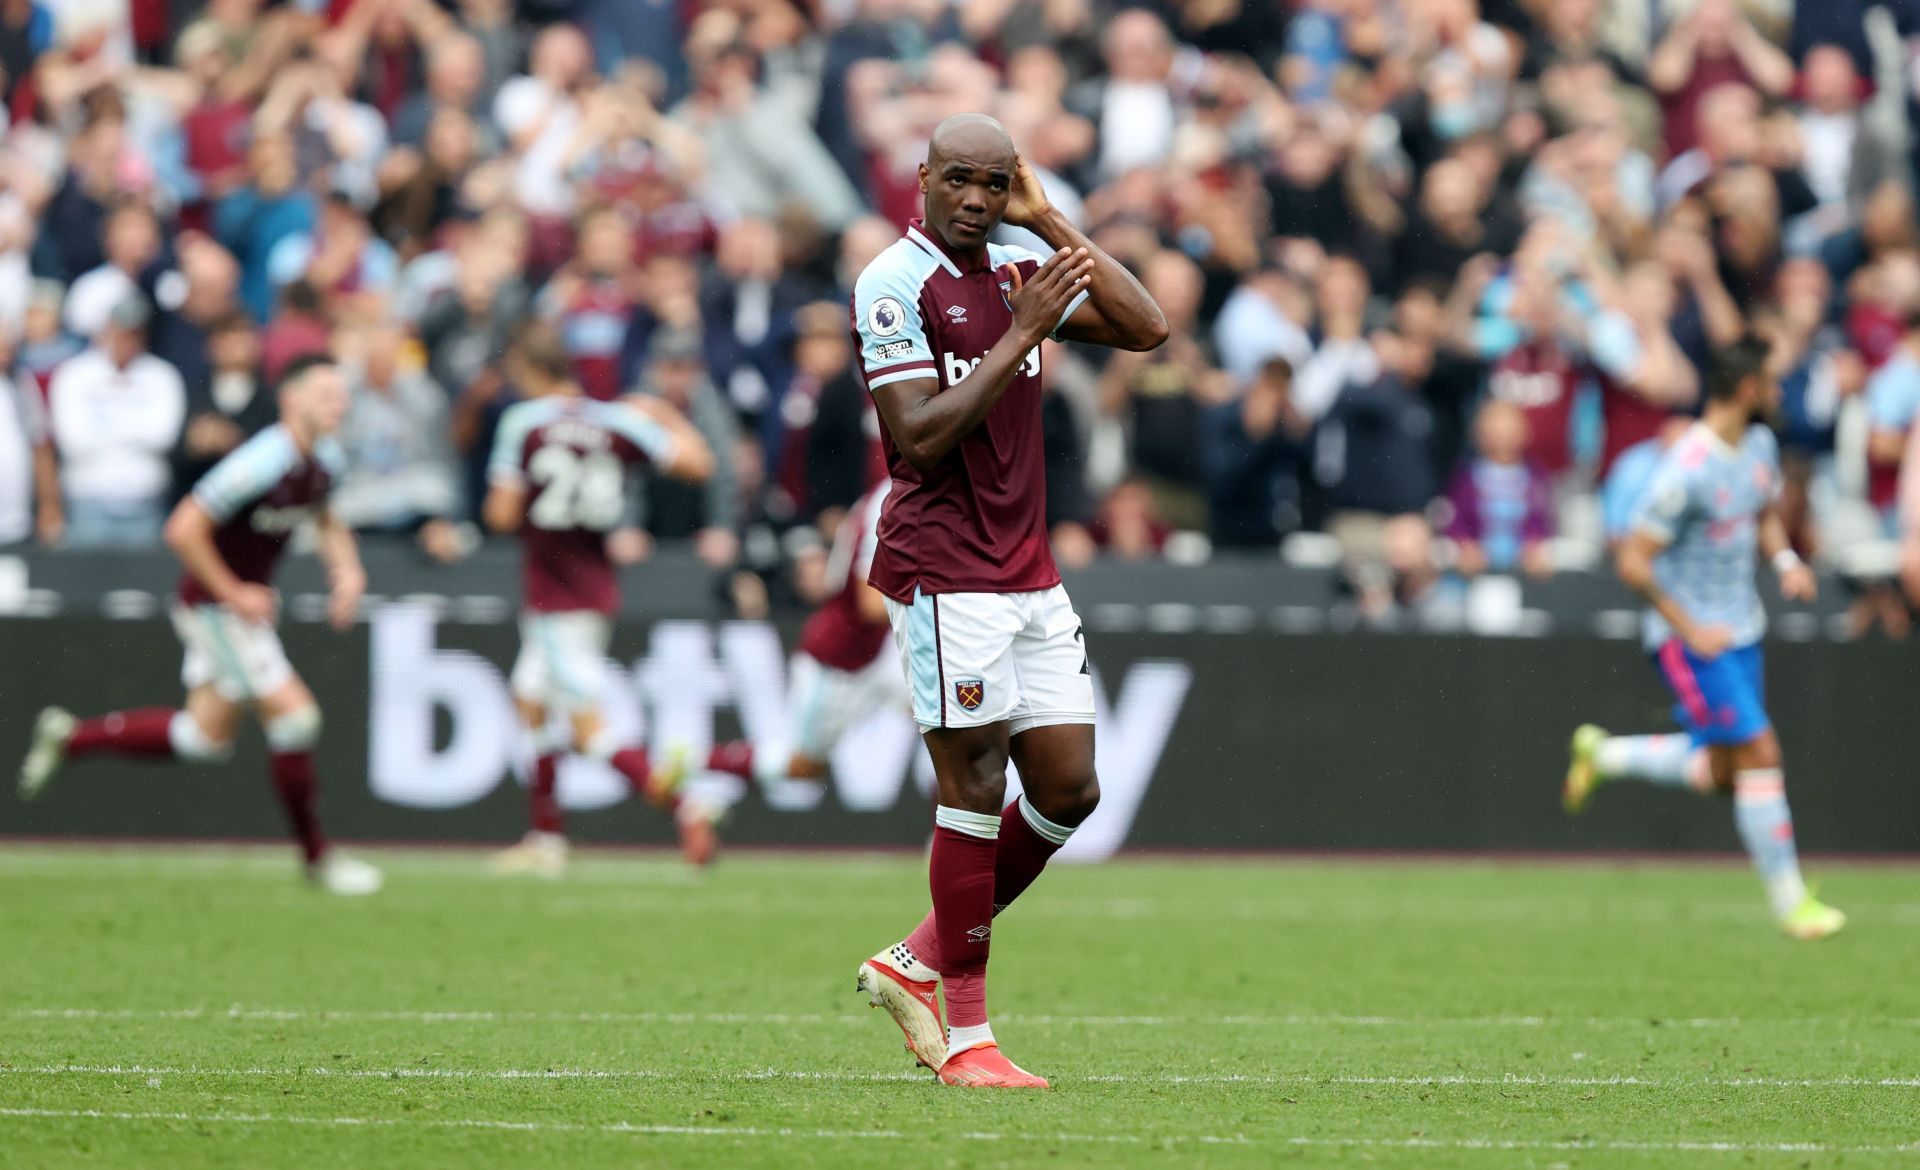 Angelo Ogbonna in action for West Ham United in the Premier League.